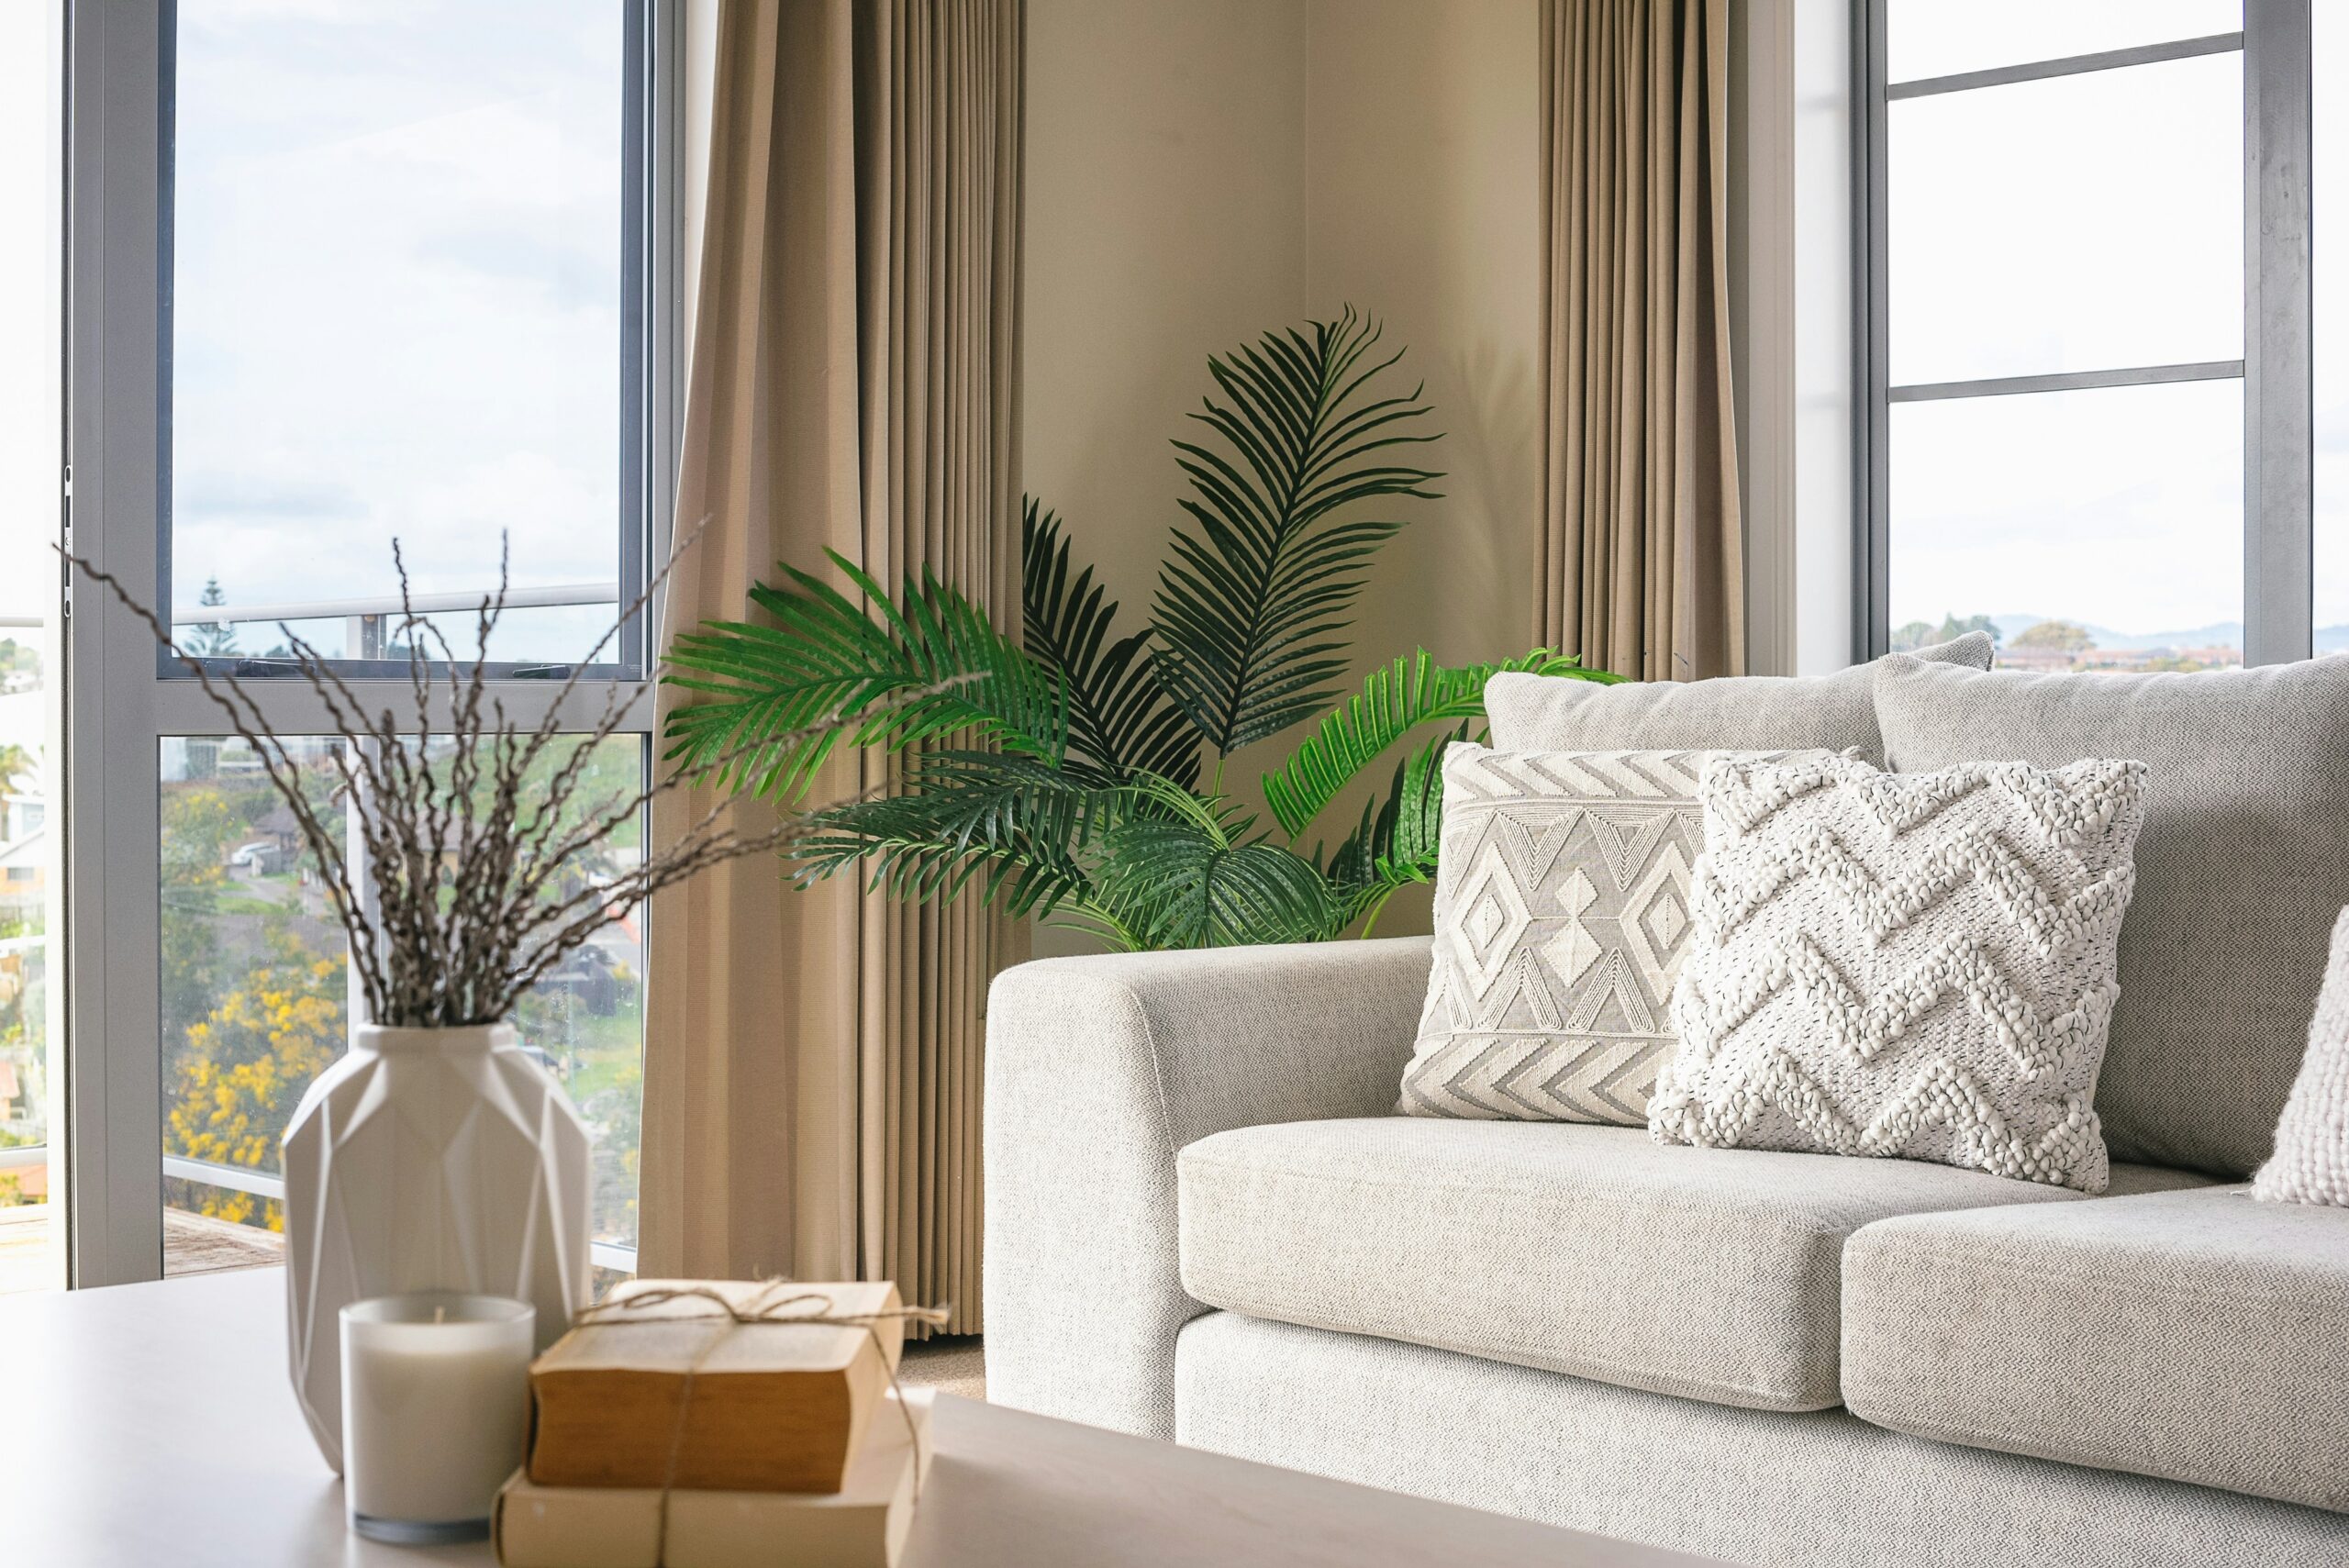 Don't underestimate the power of plants and decor. This can turn any room at home into a relaxing space. Pictured: A living room with plants and decor